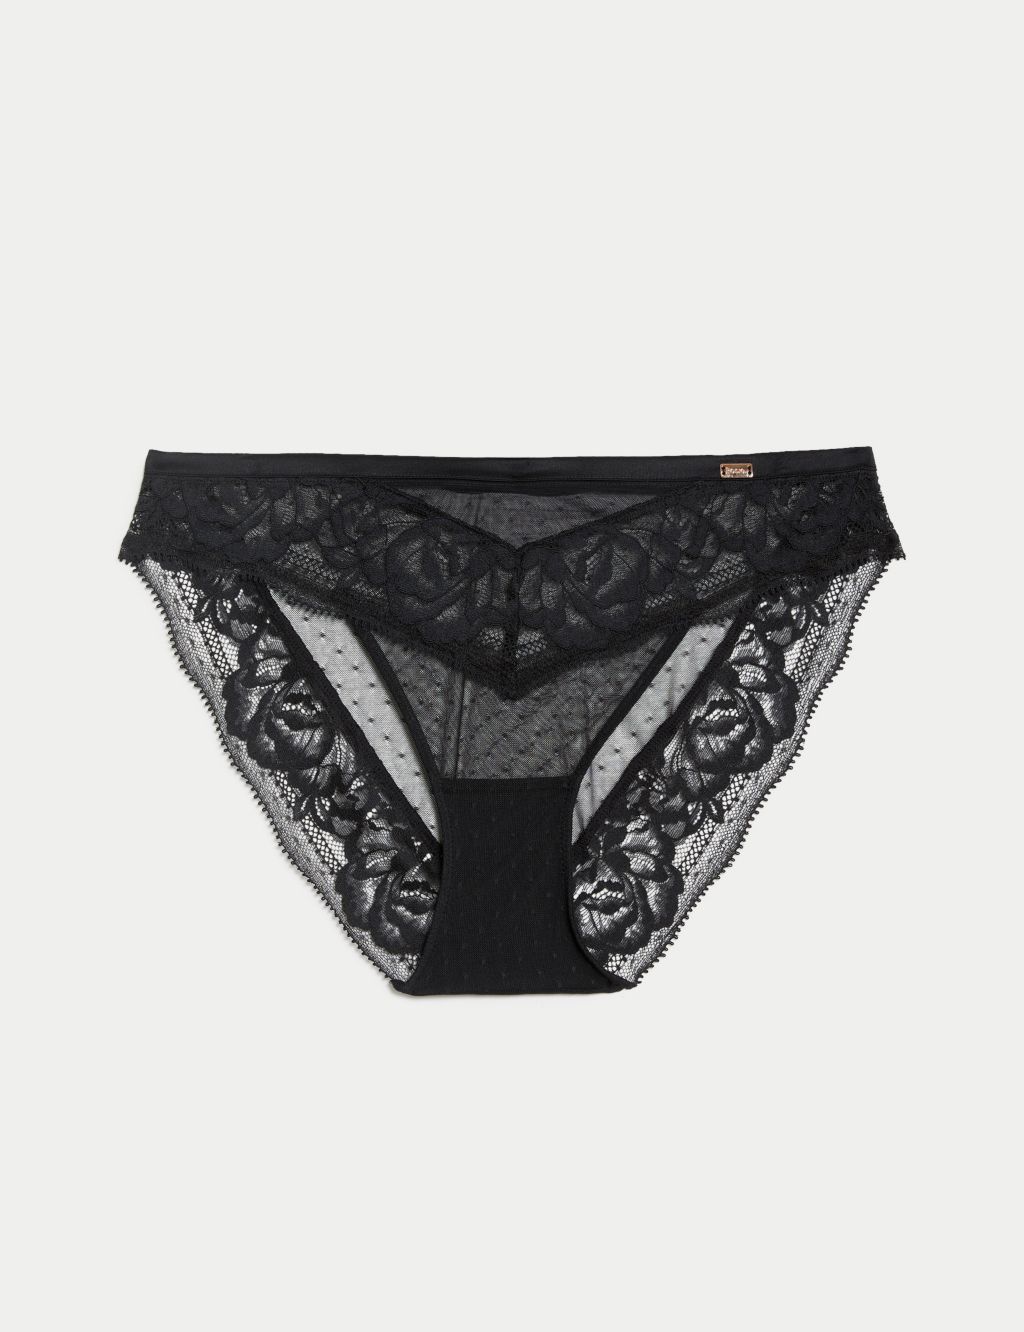 Sheer and Lace High Leg Knickers | Rosie | M&S